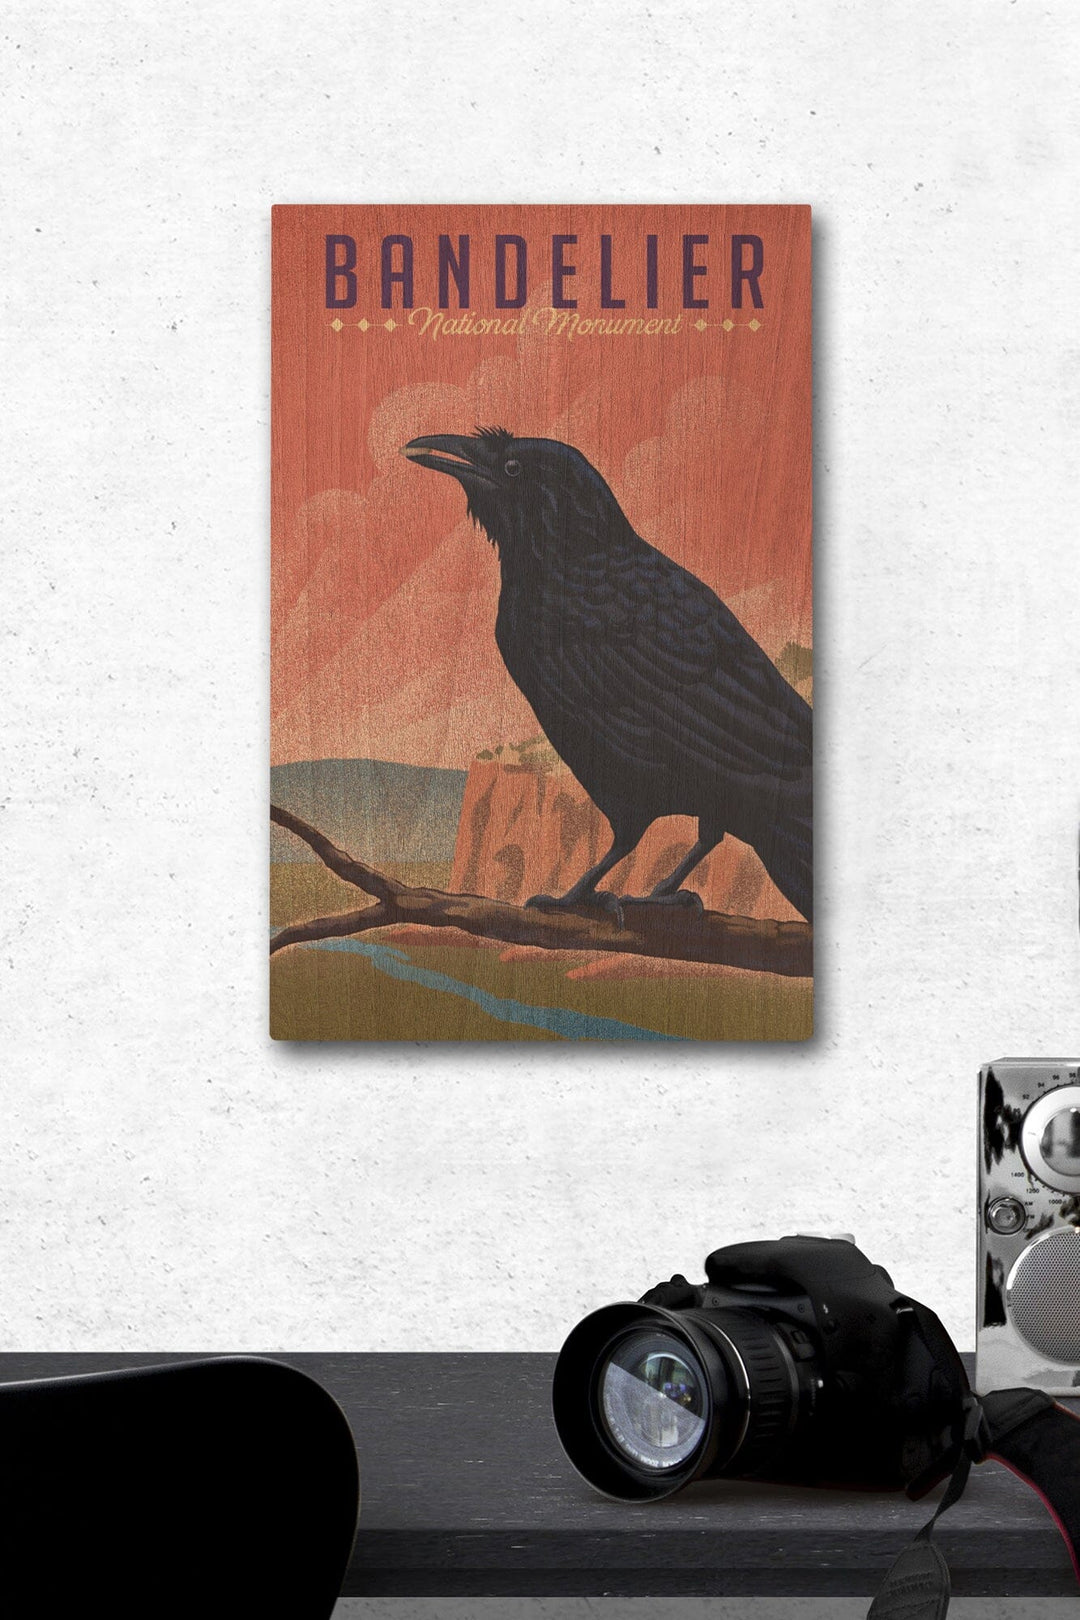 Bandelier National Monument, New Mexico, Raven, Litho, Lantern Press Artwork, Wood Signs and Postcards Wood Lantern Press 12 x 18 Wood Gallery Print 